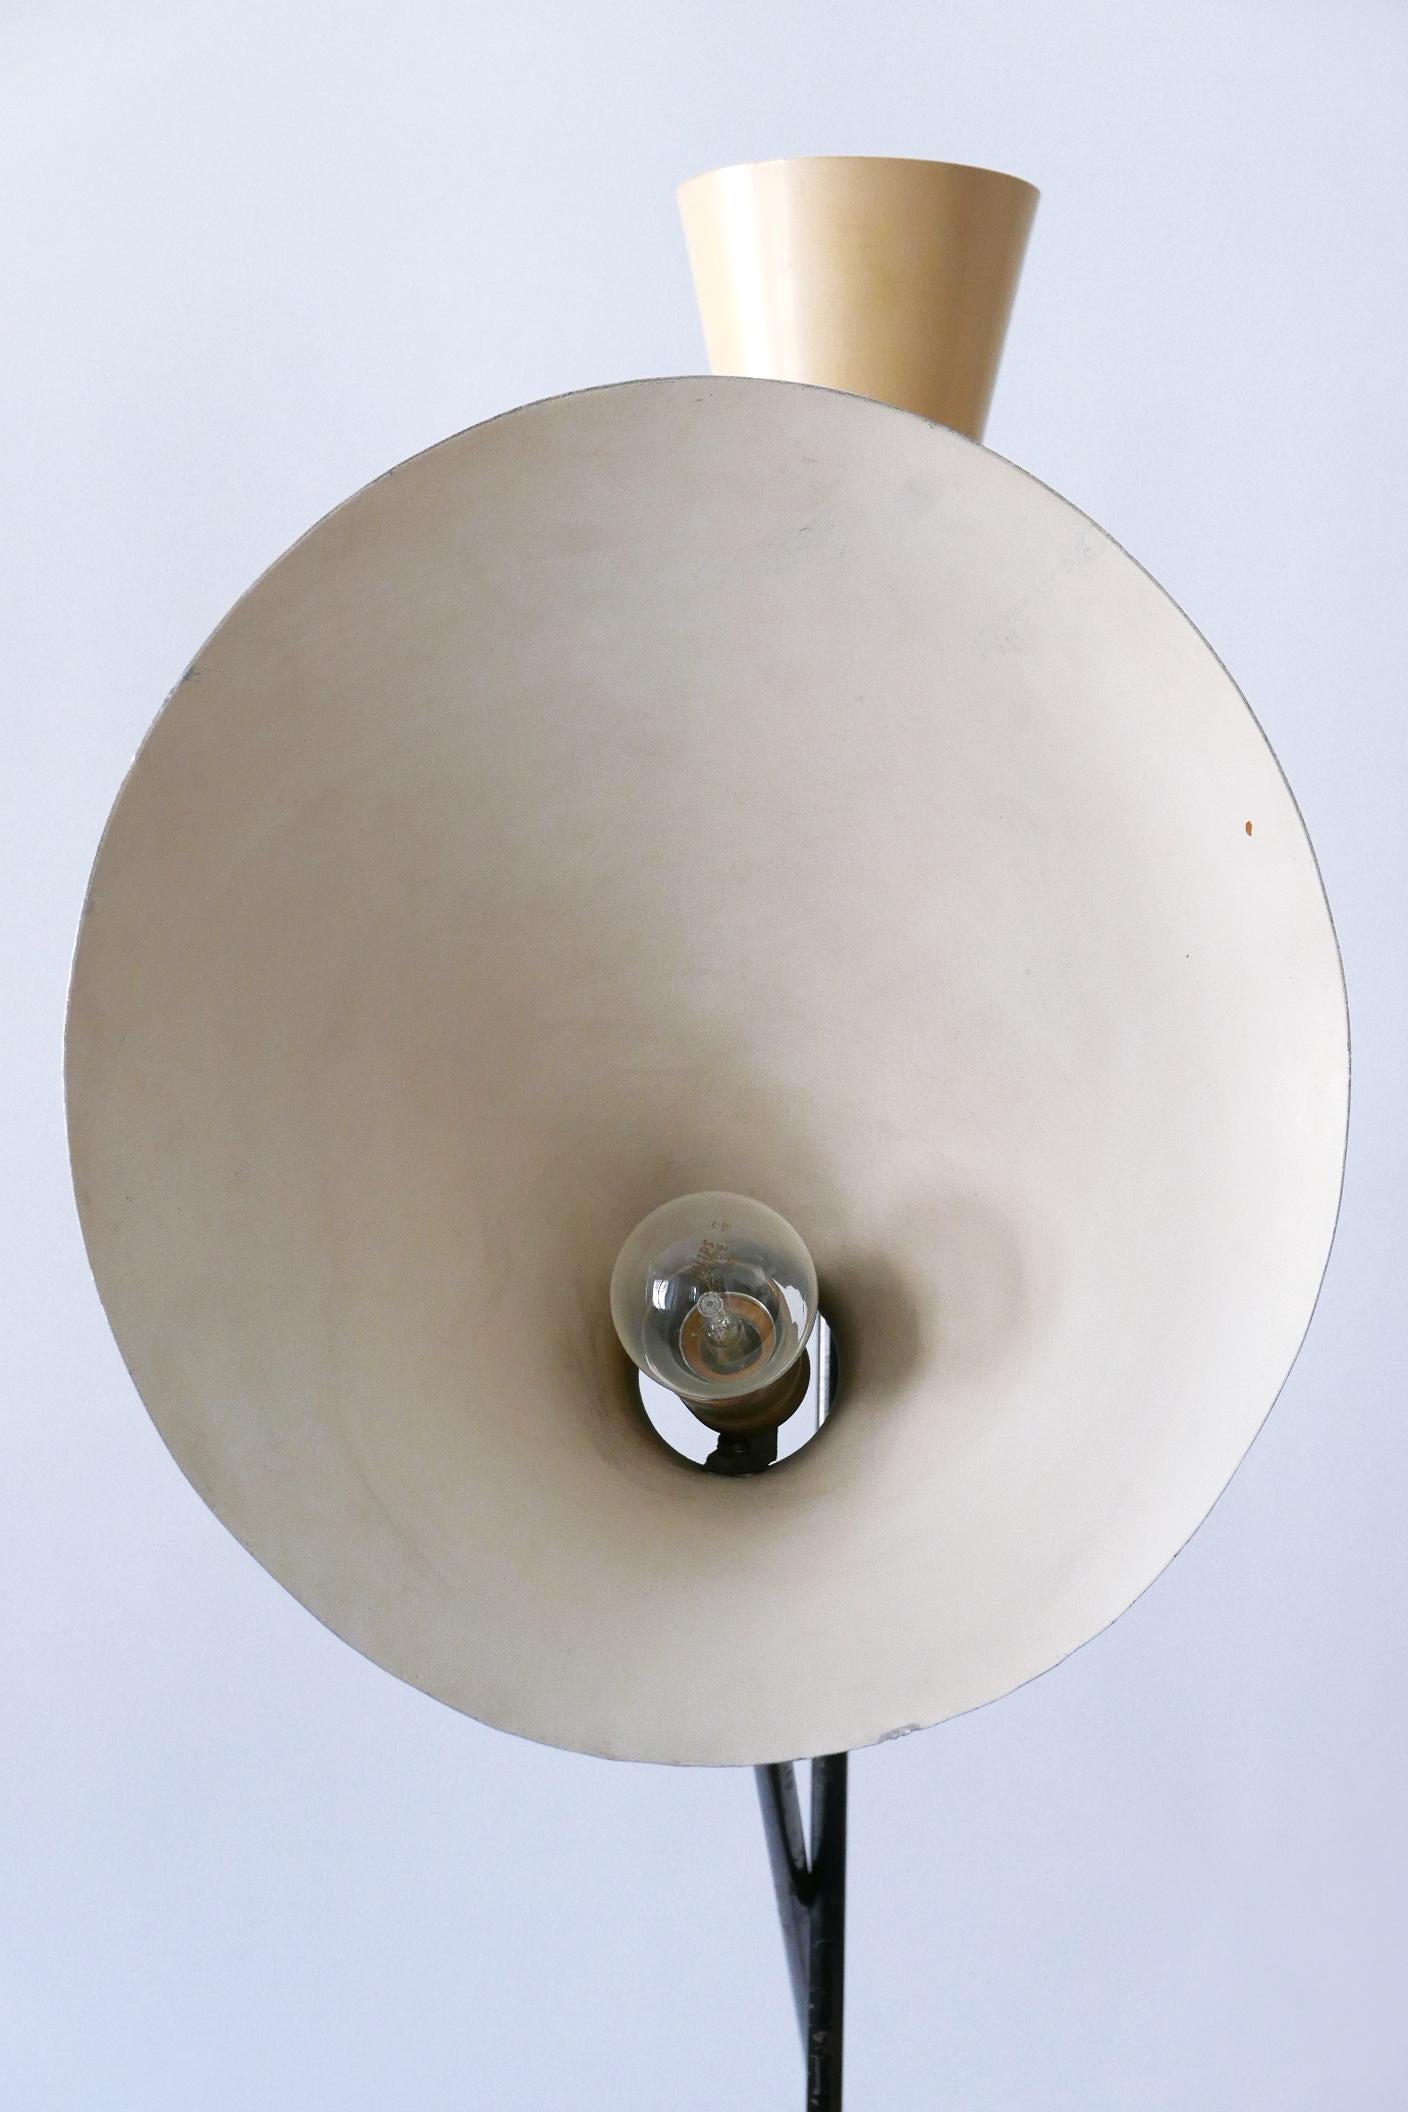 Rare Iconic Mid-Century Modern Floor Lamp by Prof. Carl Moor for BAG Turgi 1950s For Sale 9